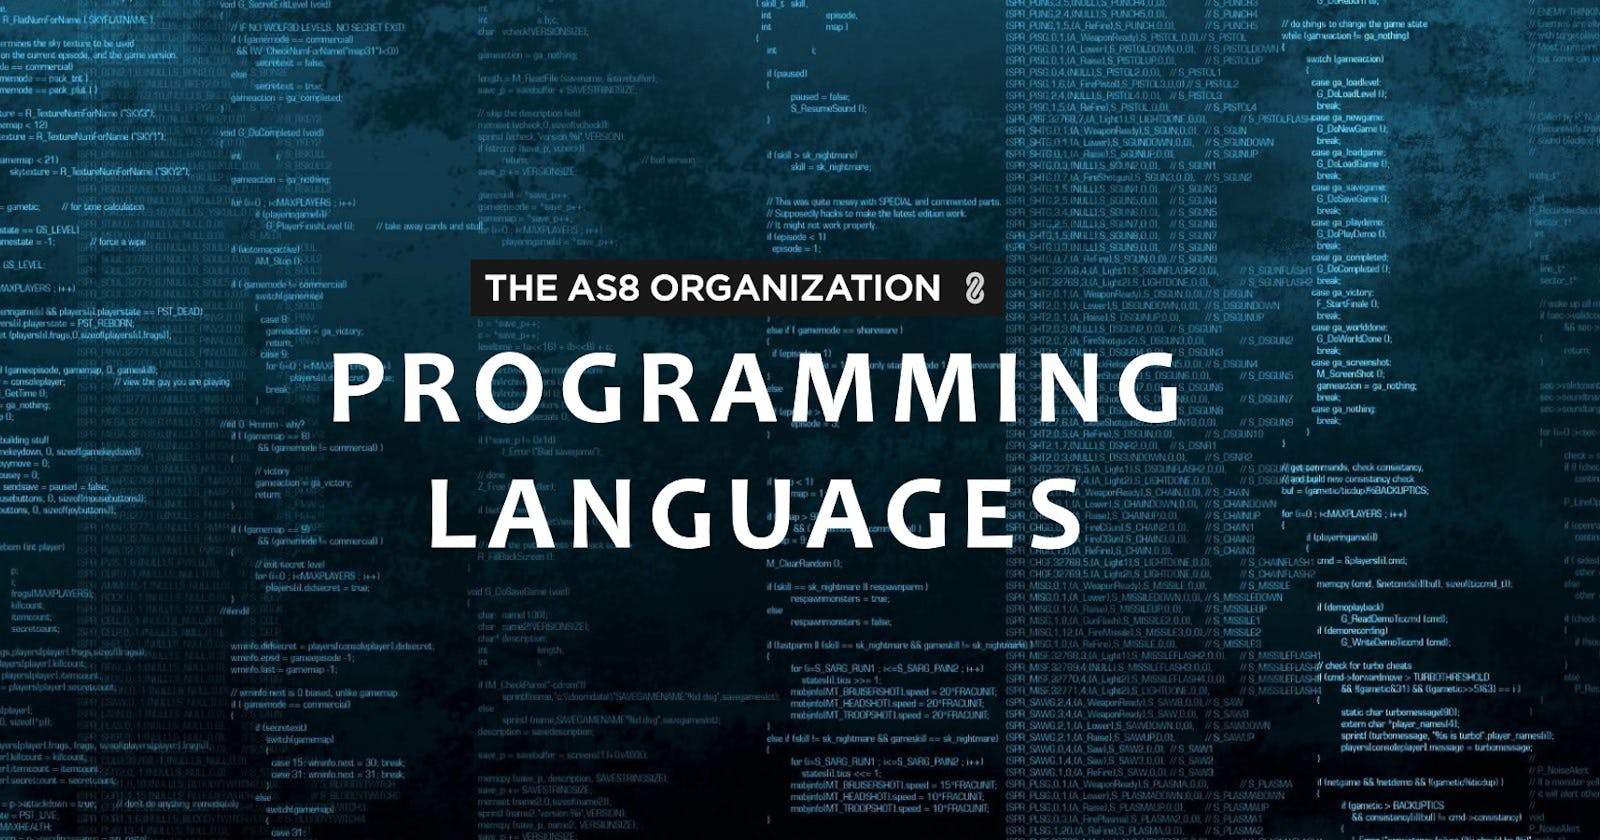 Different programming languages and their use cases